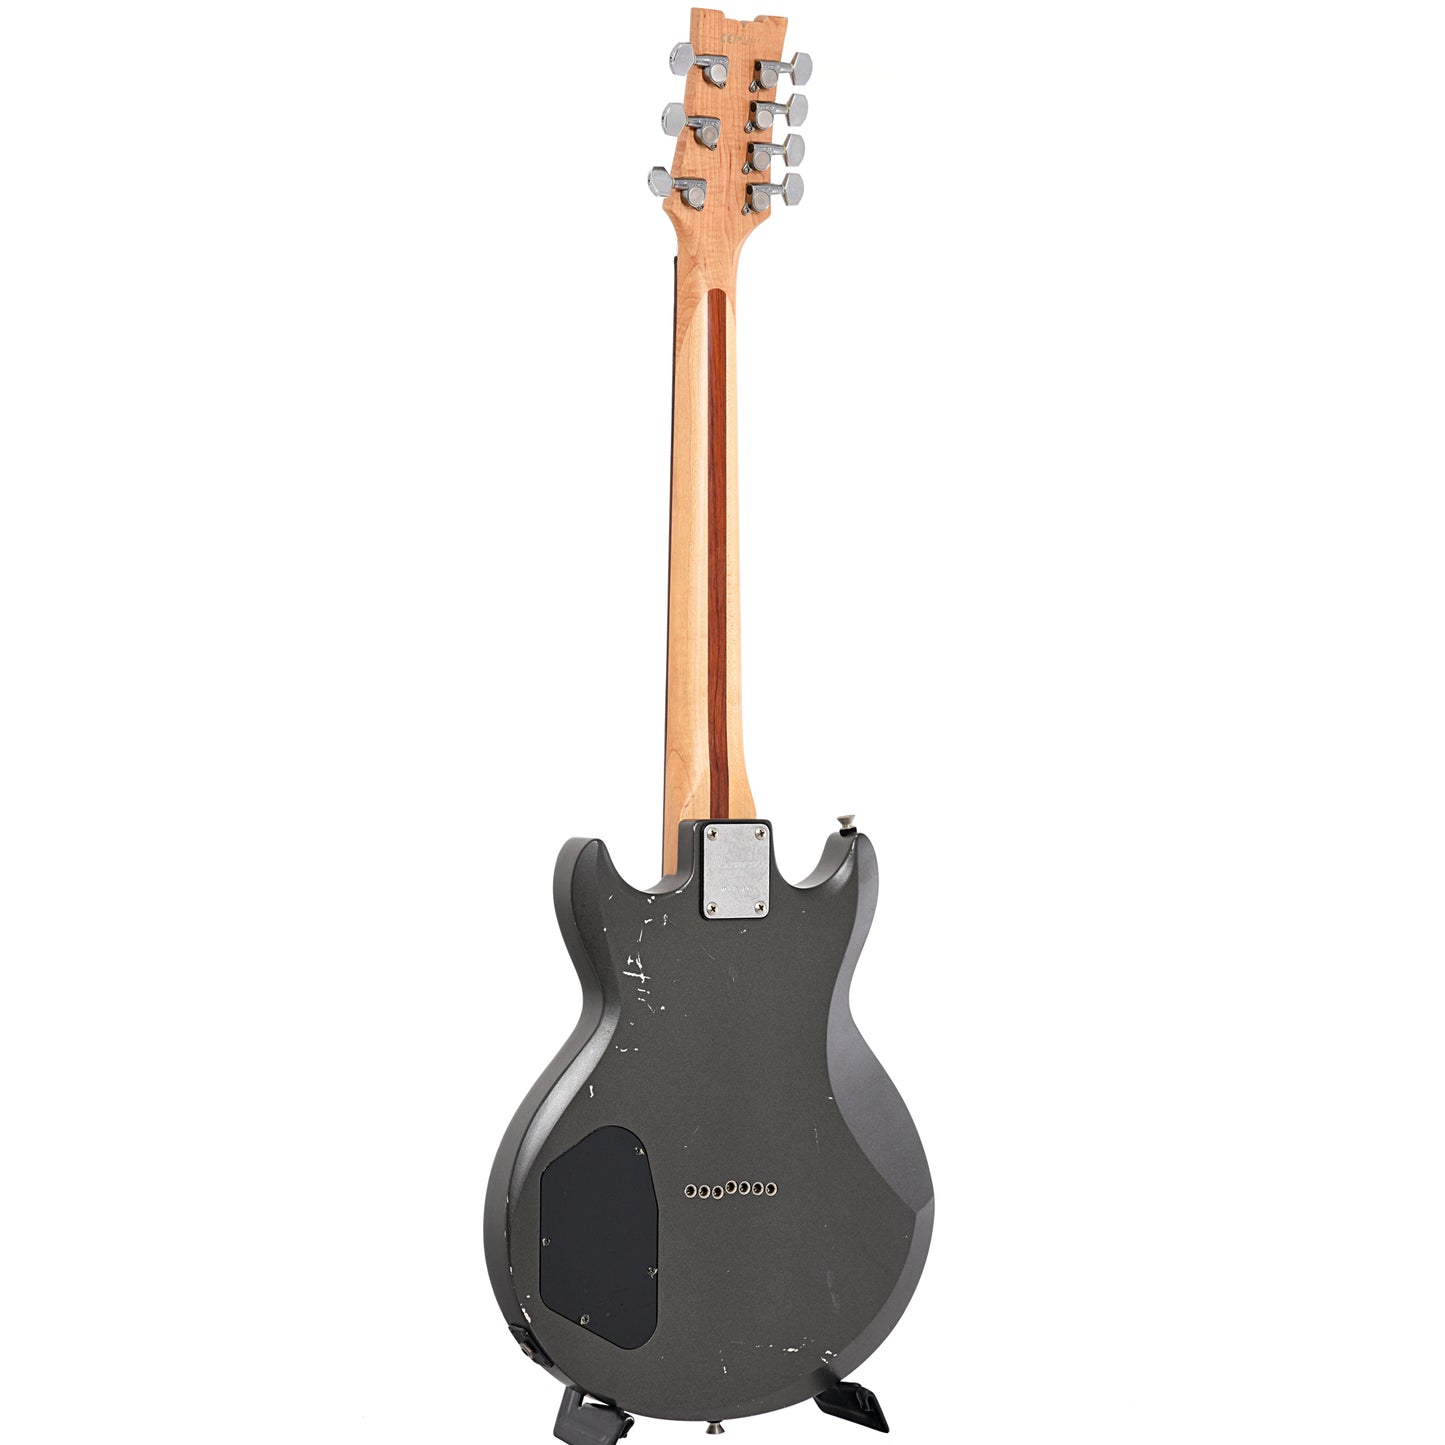 Image 11 of Ibanez AX75217- SKU# 30U-210995 : Product Type Solid Body Electric Guitars : Elderly Instruments